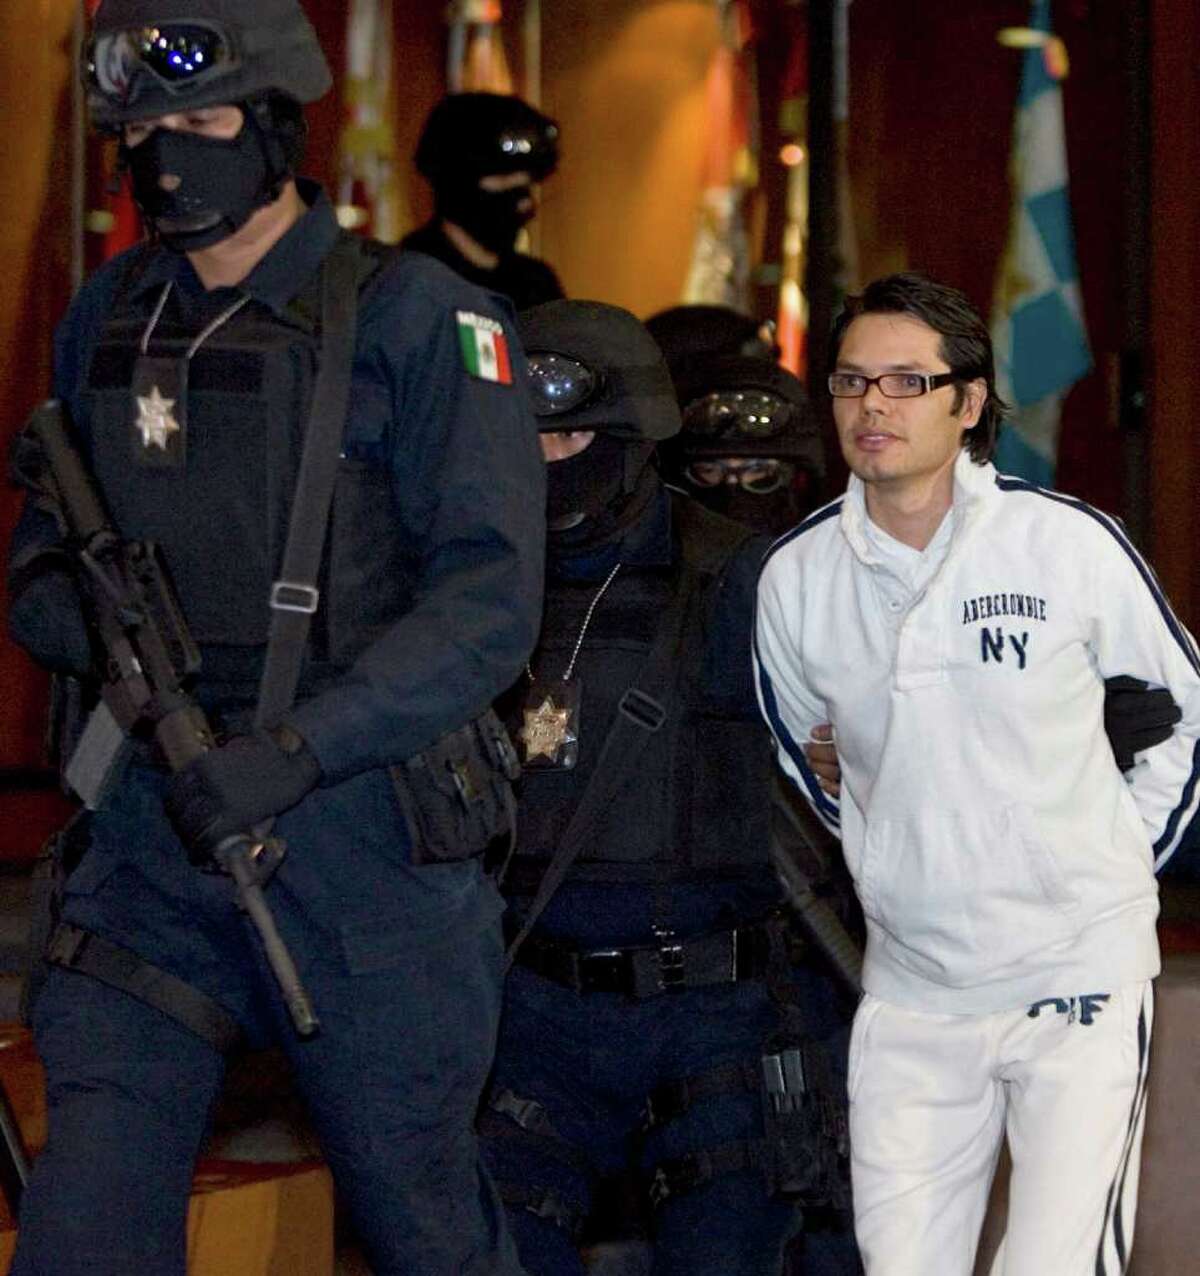 Mexican federal agents escort alleged Mexican drug trafficker Vicente Carrillo Leyva, right, during his presentation to the media in Mexico City in 2009.